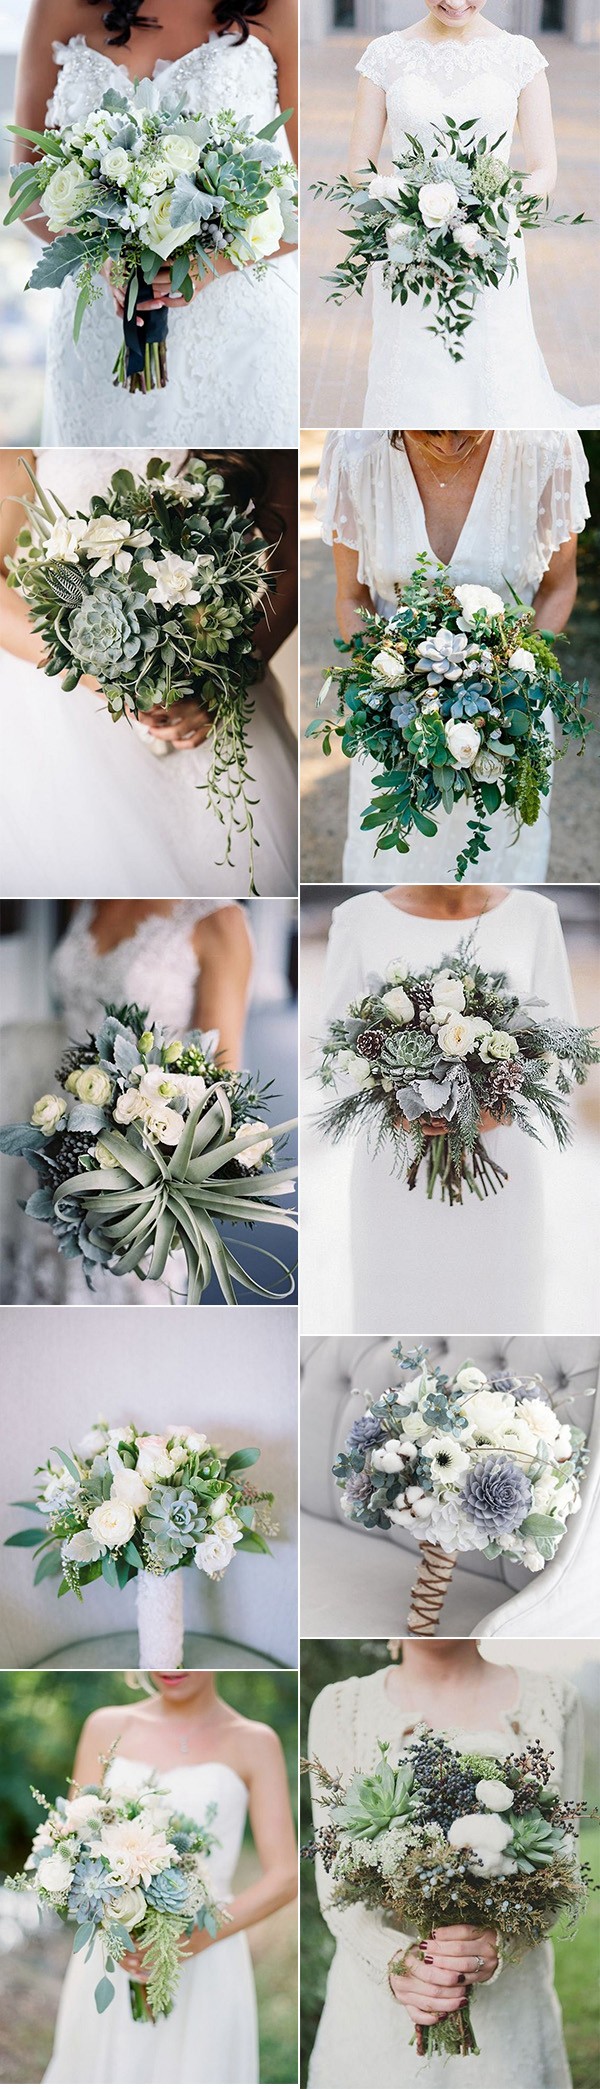 trending greenery wedding bouquets with succulents for 2018